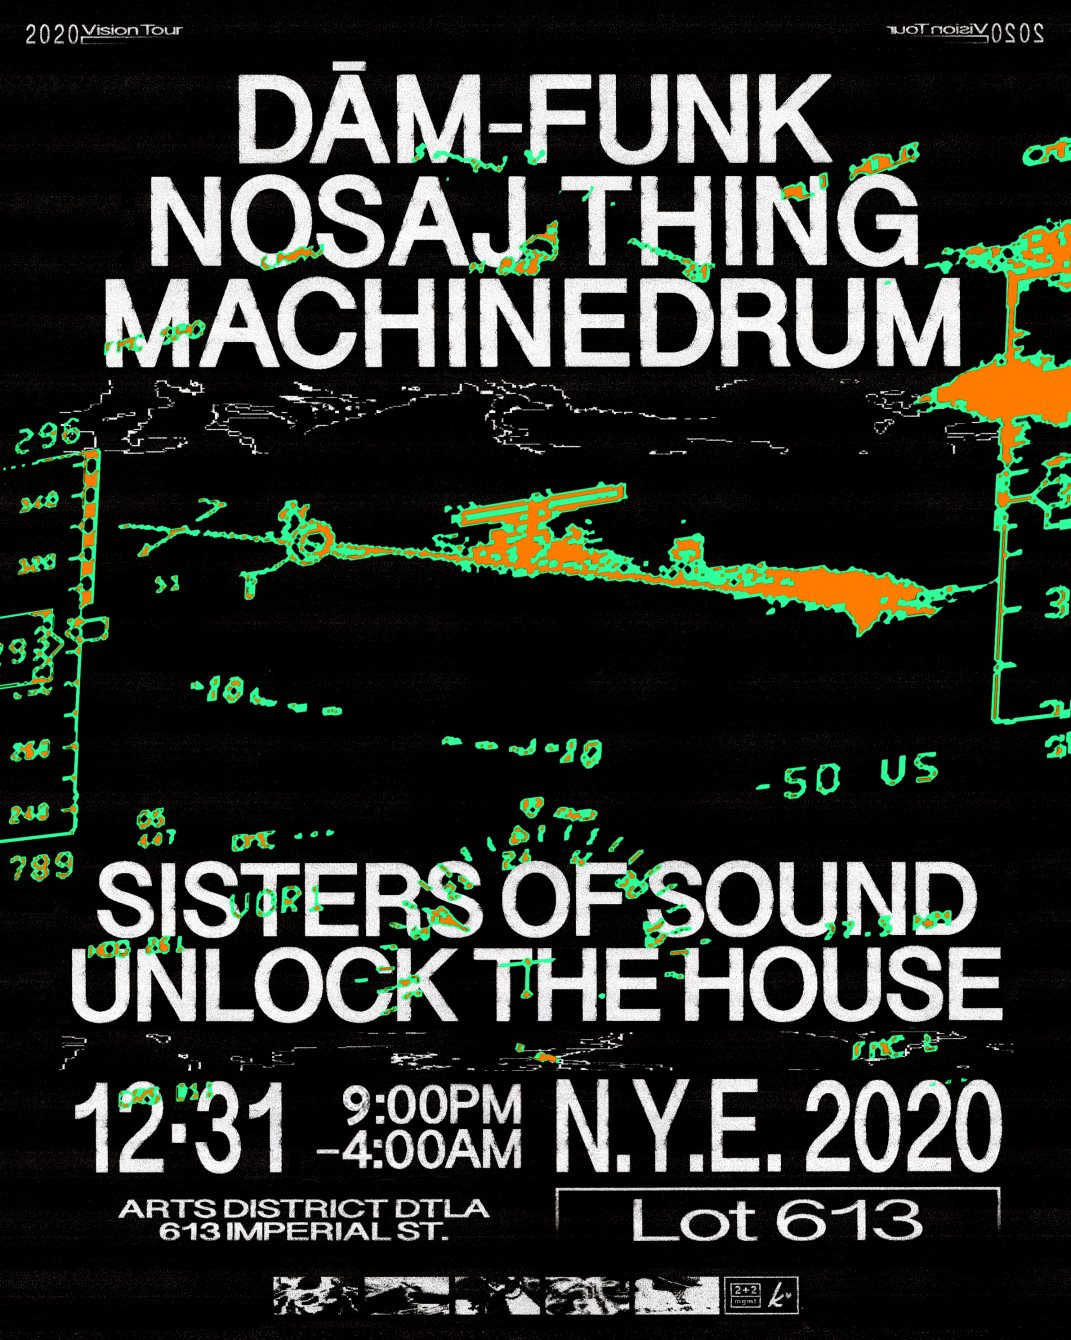 2020 Vision NYE with DâM-Funk, Nosaj Thing, Machinedrum - Flyer front